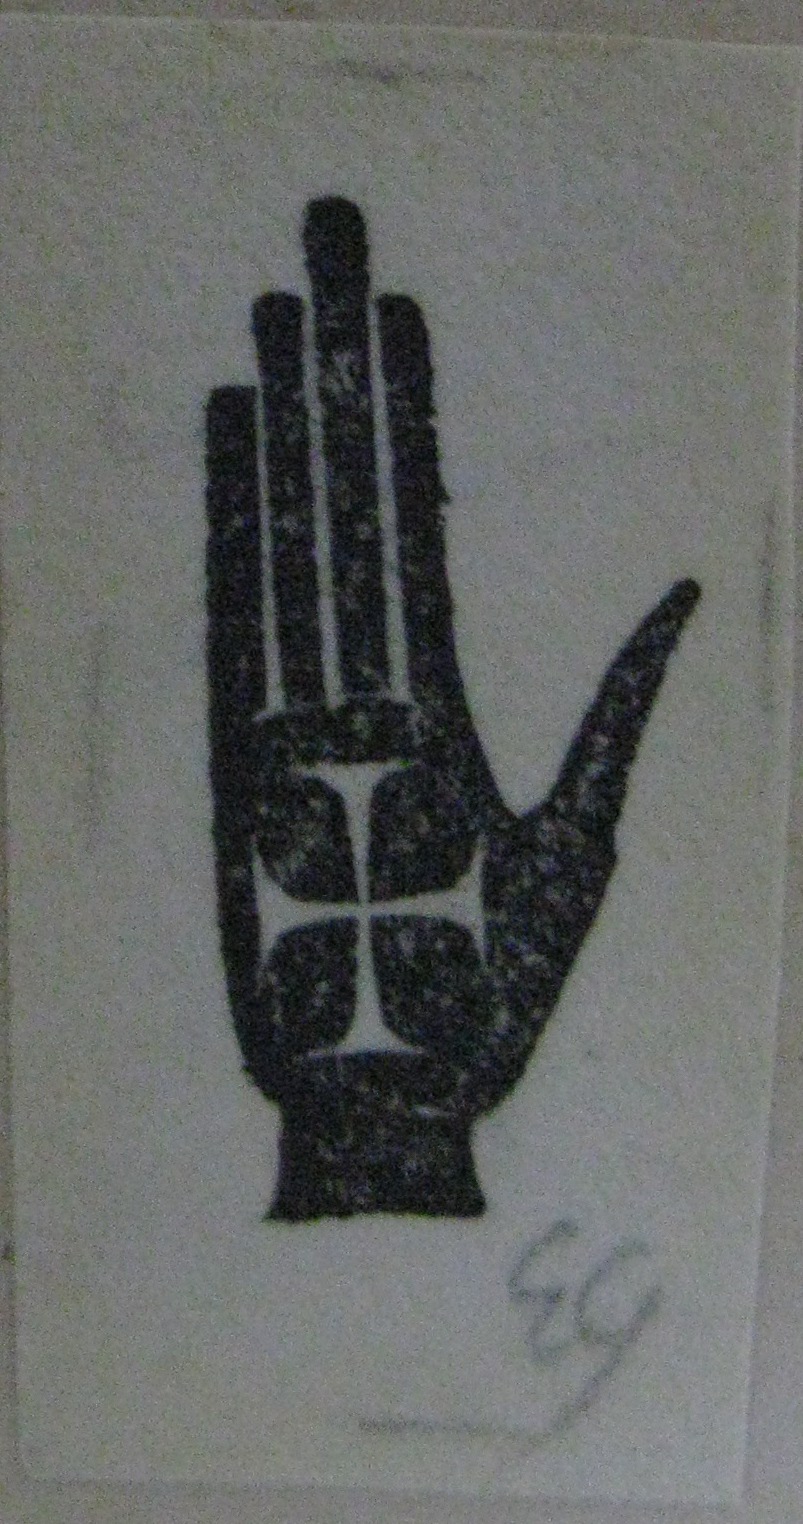 Device: Hand and Cross